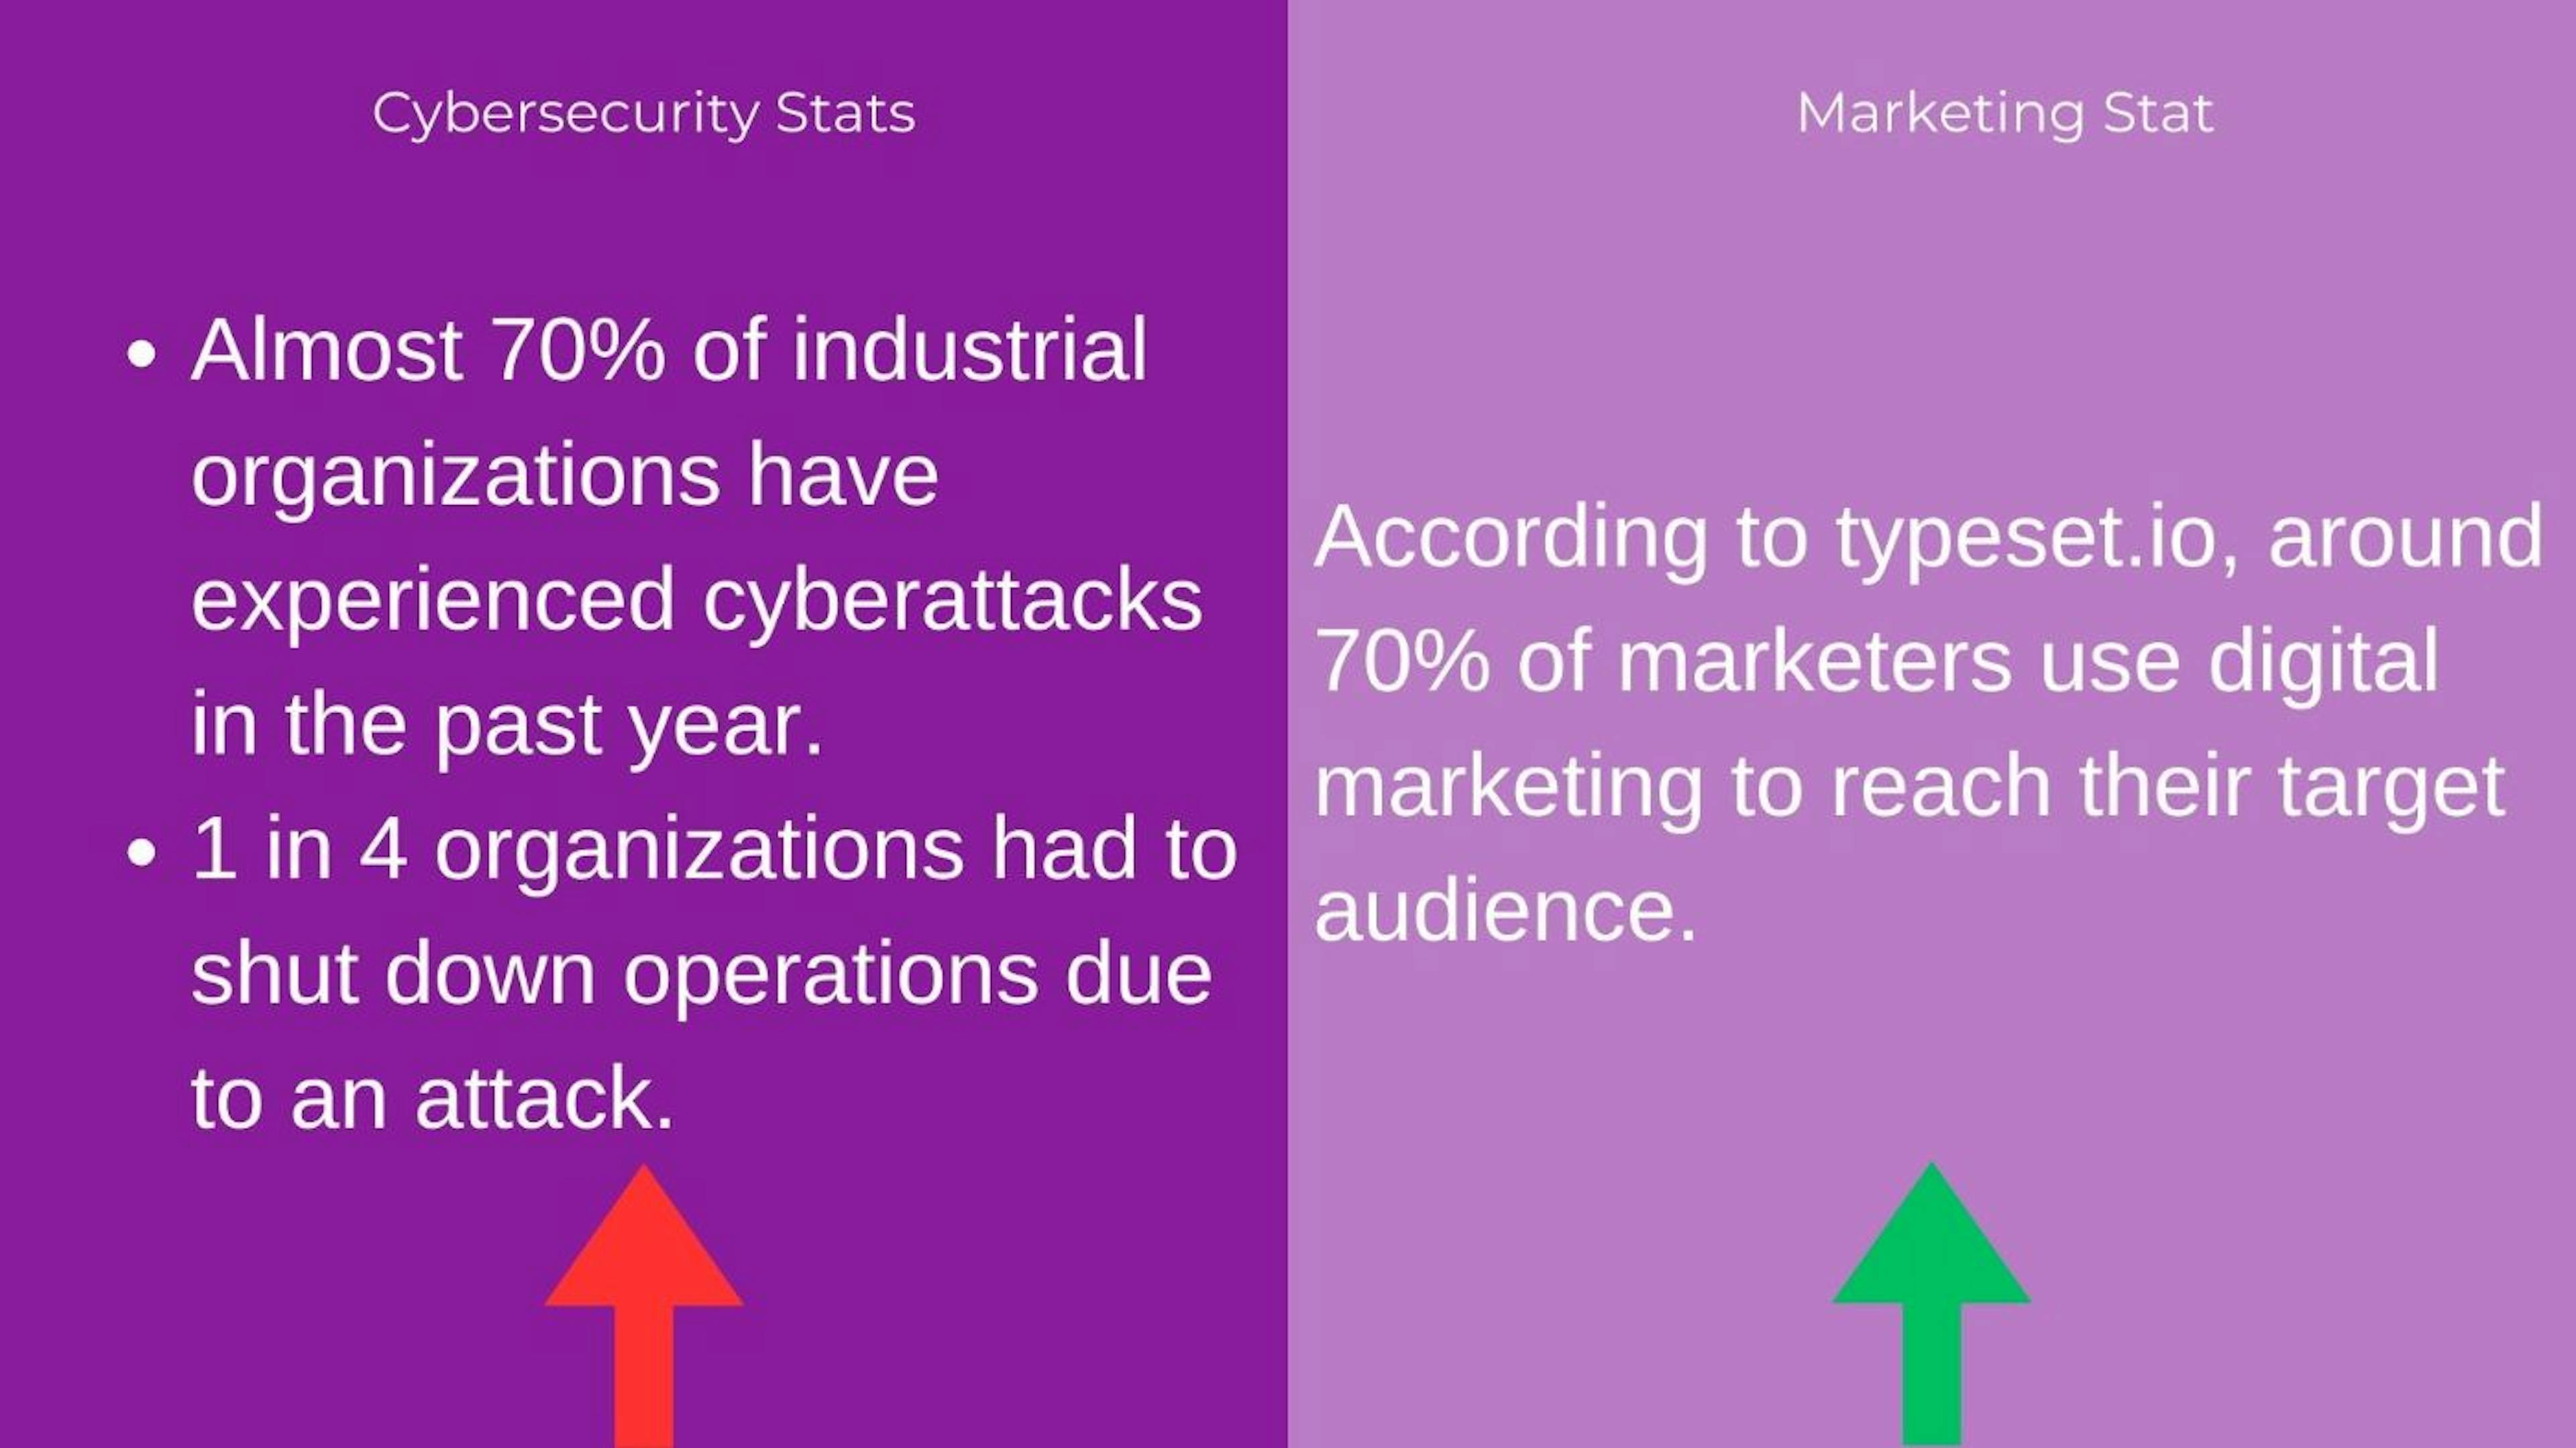 Cybersecurity and Marketing Statistics